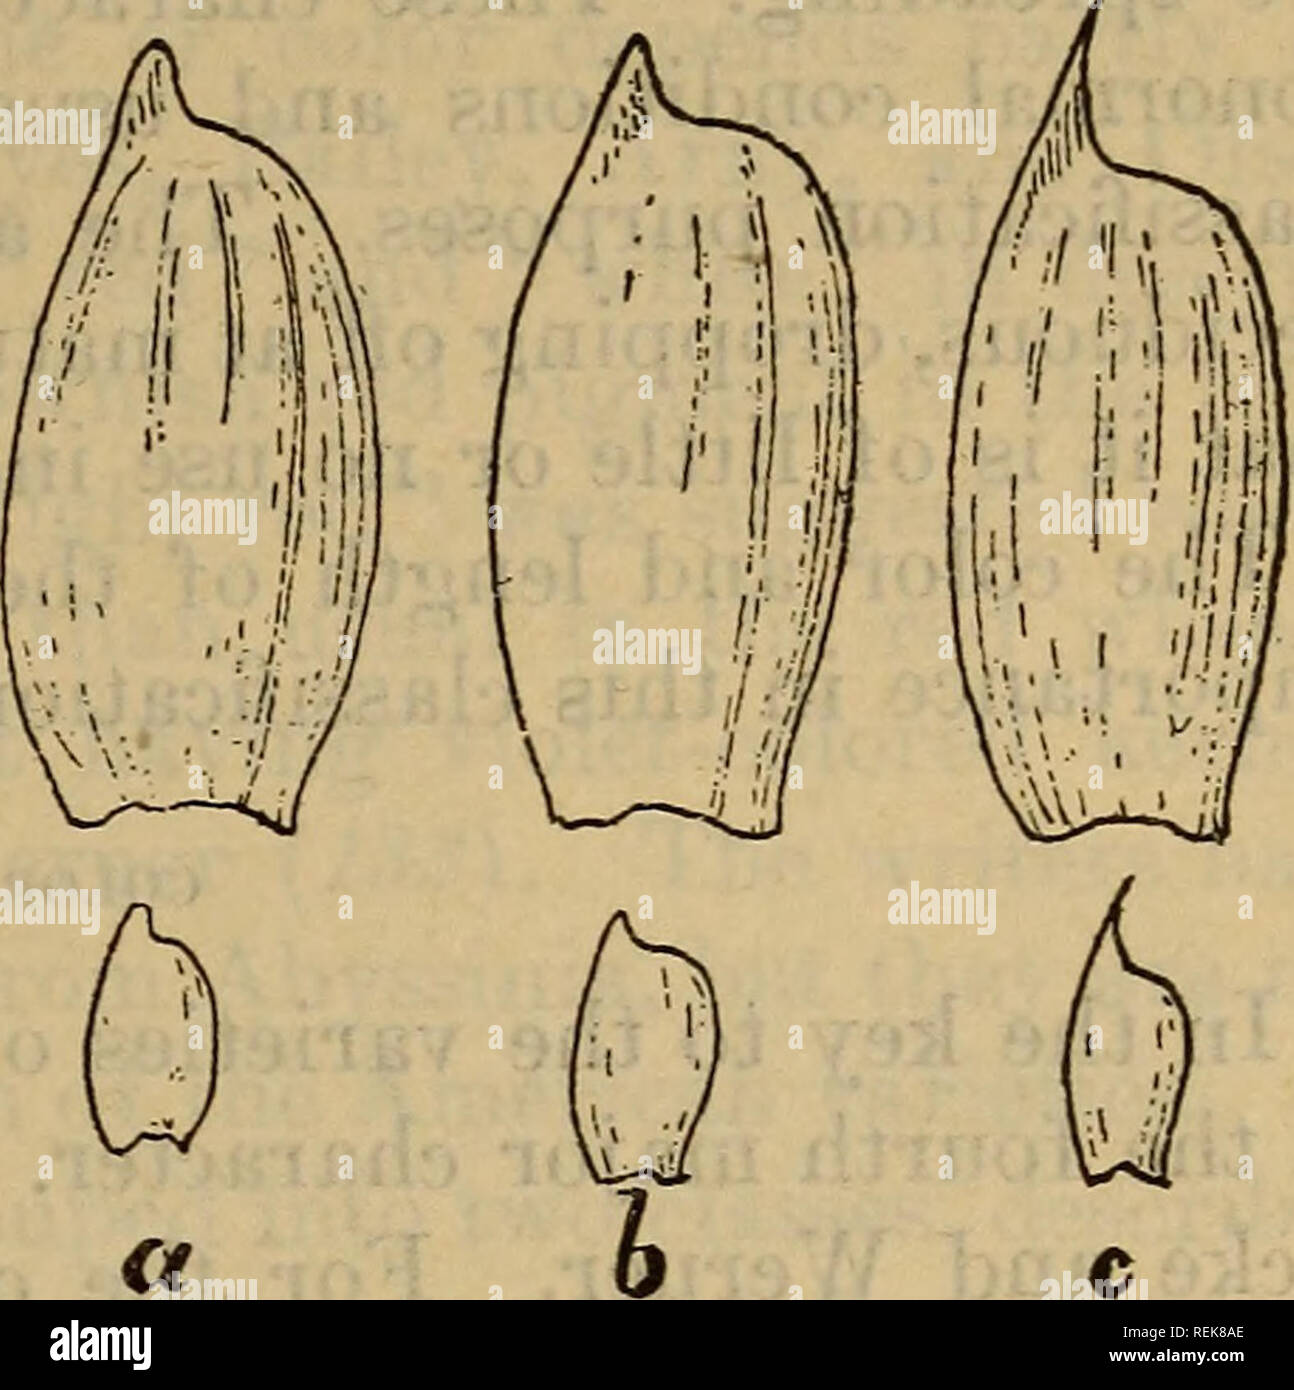 . Classification of American wheat varieties. Wheat; Wheat. Fig. 7.—Beak widths: a, Narrow ; 6, midwide; o, wide. (Natural size and enlarged 3 diameters.). Fig. 8.—Beak shapes: a, Obtuse; t, acute; cv, acuminate. (Natural size and enlarged 3 diameters.) Acute beaks come to a point at the apex. Acuminate beaks are nar- rowly and very sharply pointed. All awned spikes have acuminate beaks. These shapes are shown in Figure 8. LENGTH OF THE BEAK. Beak lengths are quite variable, especially in the awned varieties, and are considerably influenced by environment. In general, condi- tions which increa Stock Photo